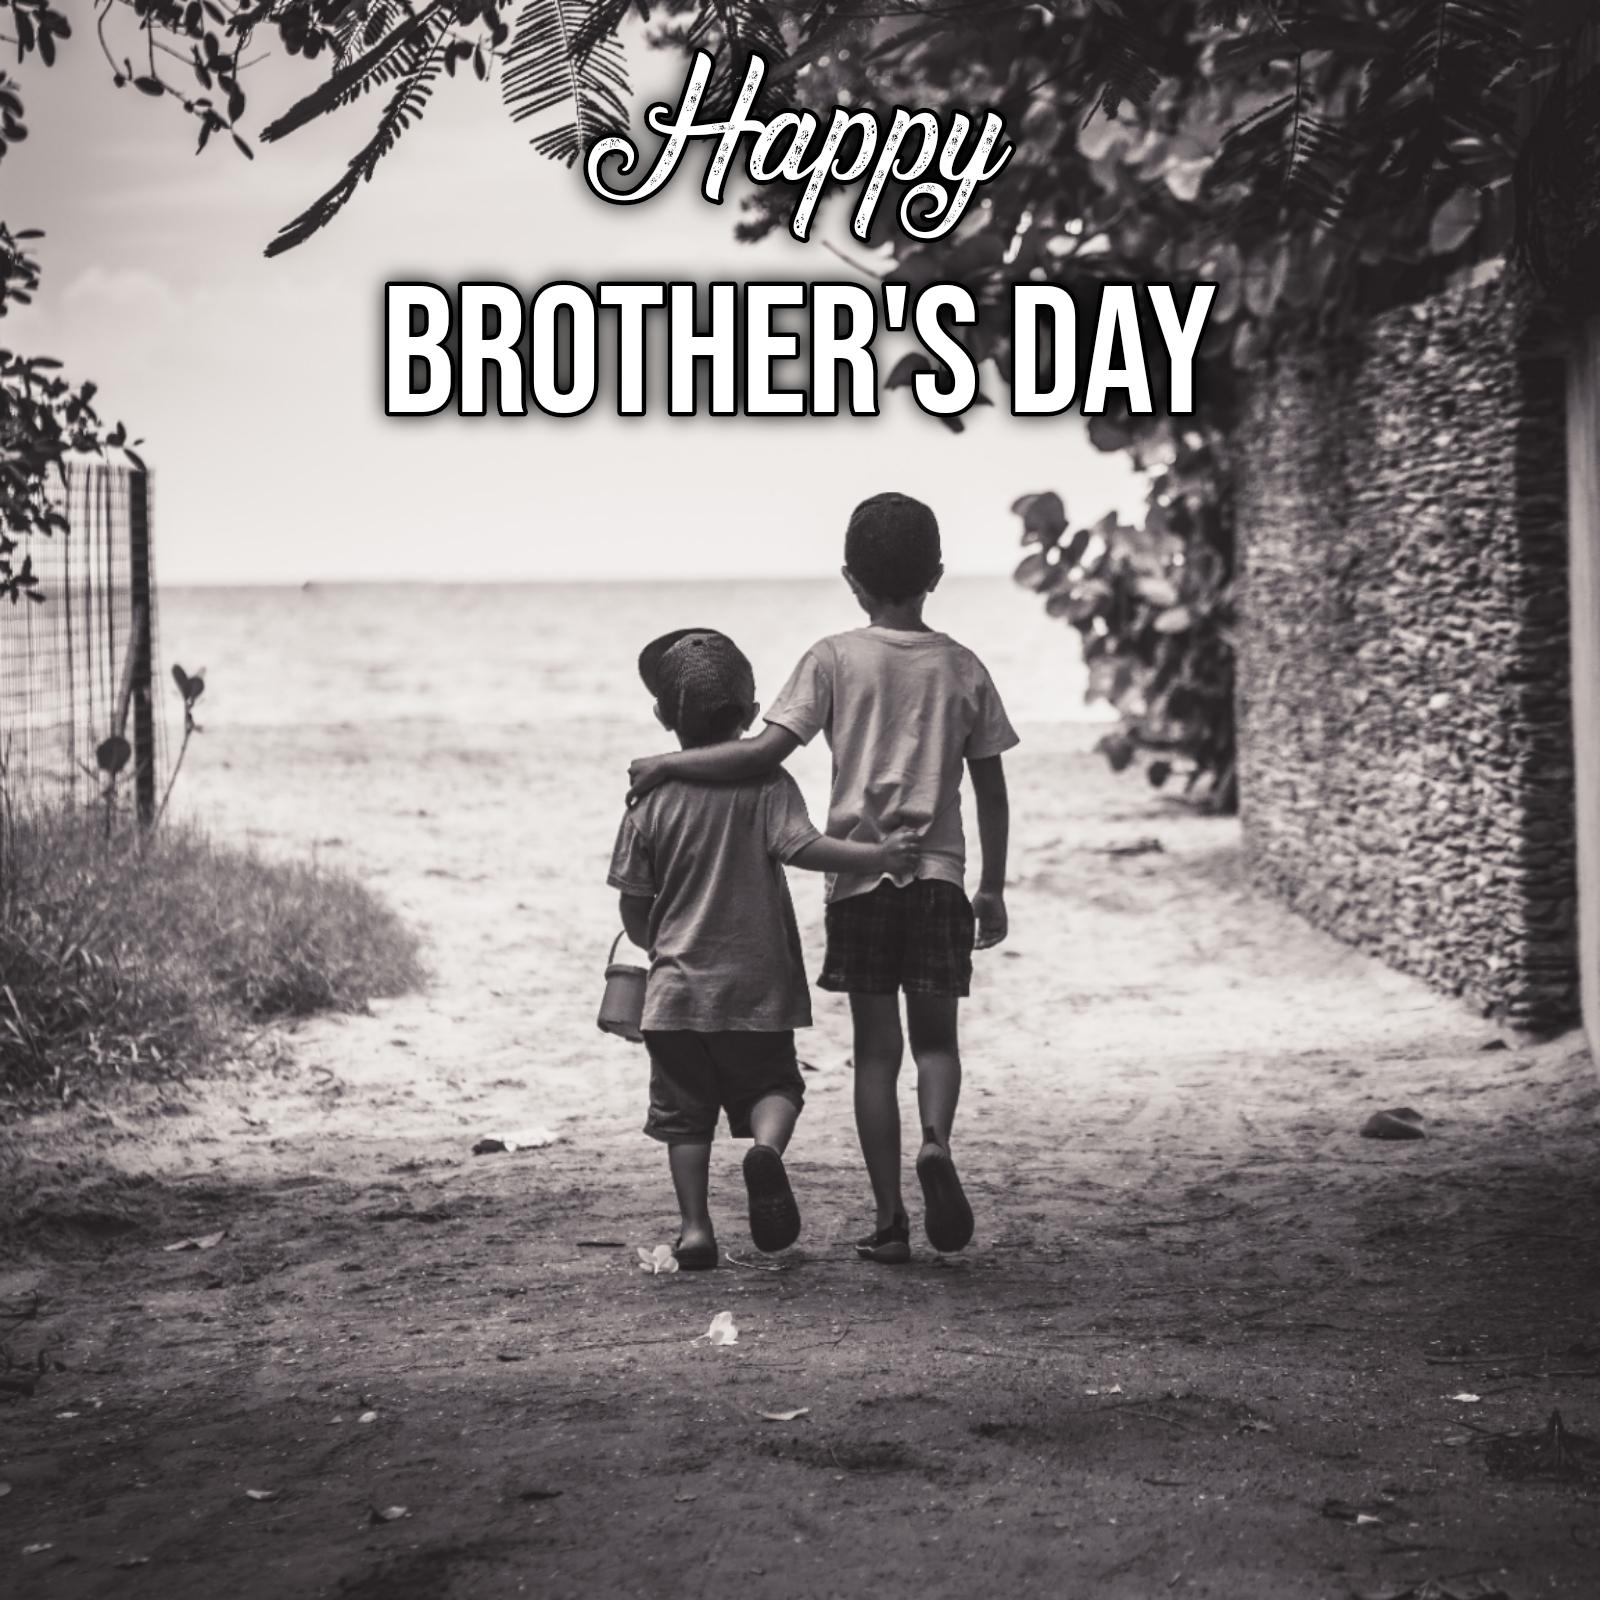 Download National Brothers Day 2022 HD WhatsApp DP and Image Download